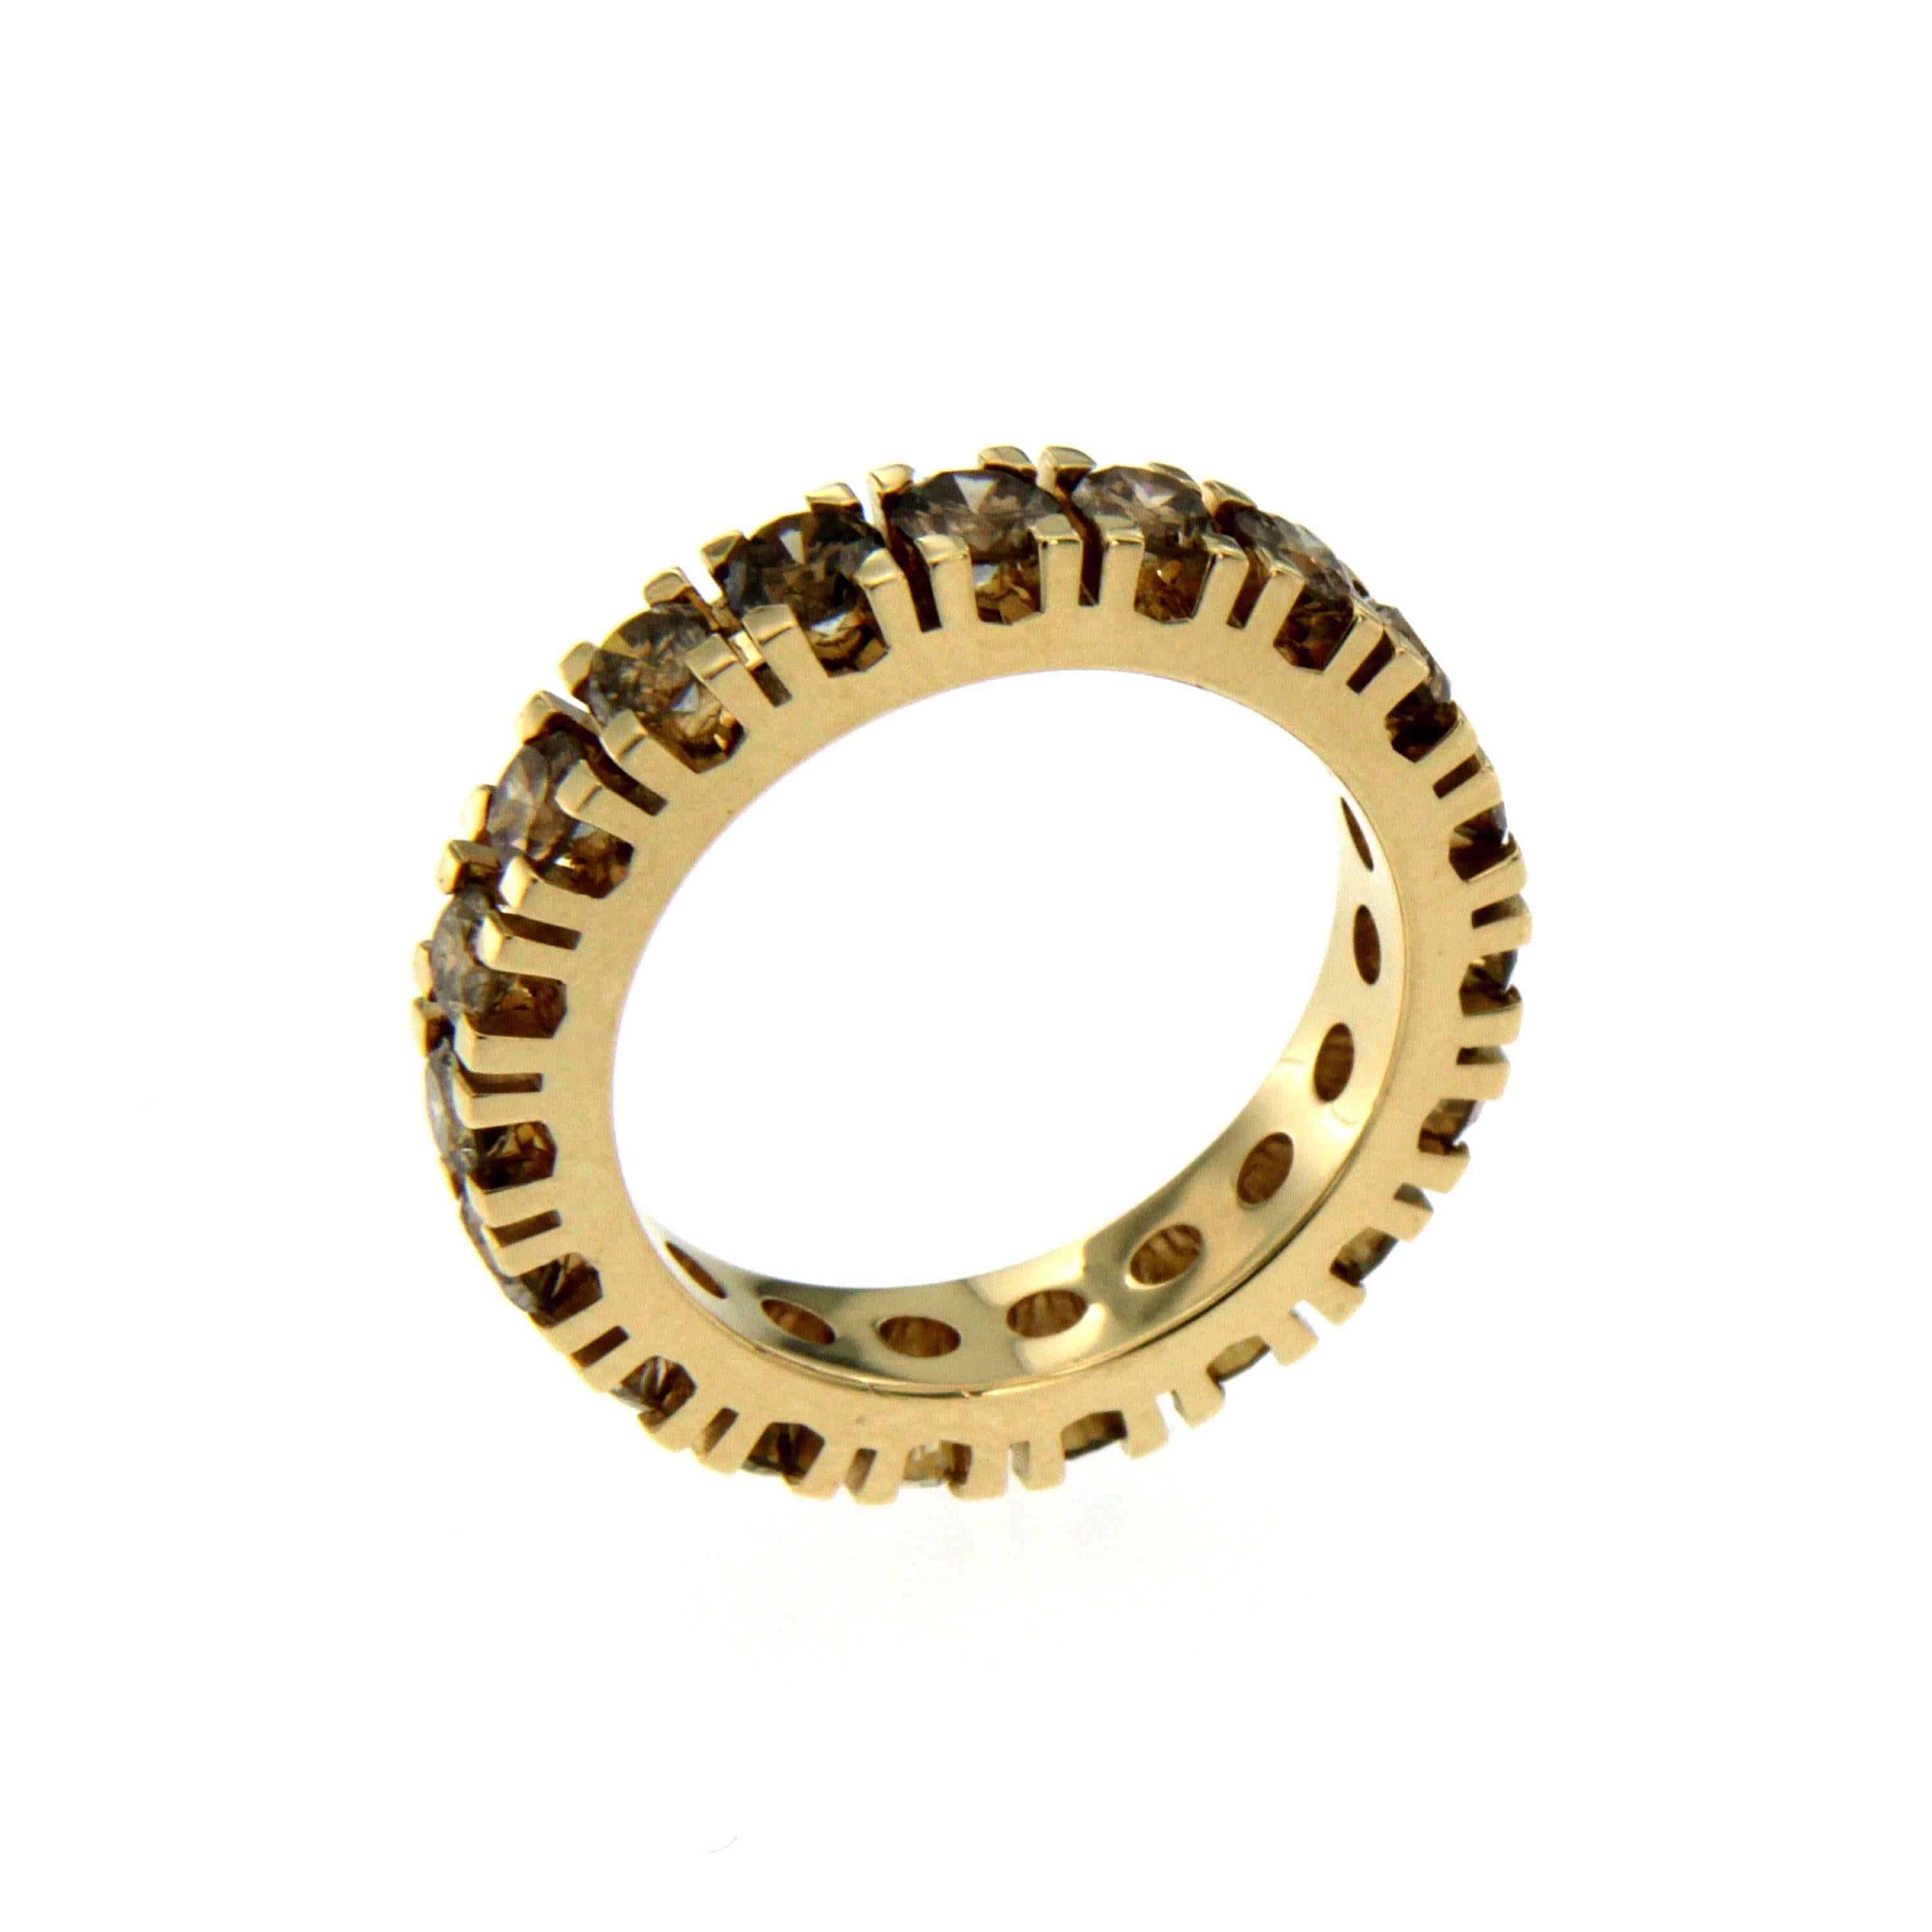 This timeless elegant brown diamond eternity ring is set with brown diamonds weighing approx. 2.60 carats, handmade in 18k yellow gold. Its simple designs makes it the perfect everyday ring for any jewellery lover. 

CONDITION: Brand New 
METAL: 18k